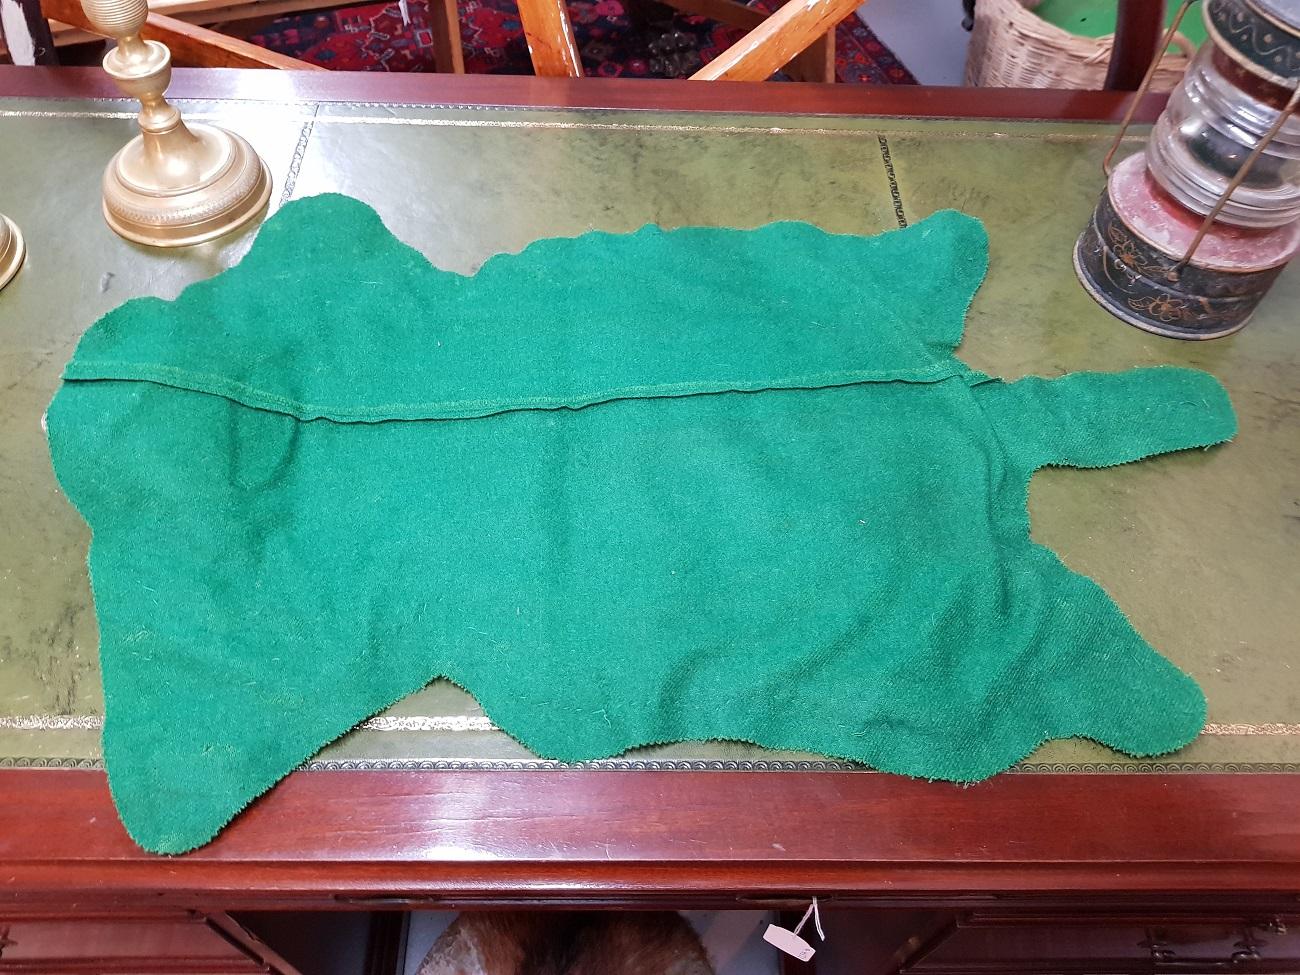 20th Century Vintage Alps Marmot Sewn on a Green Fabric For Sale